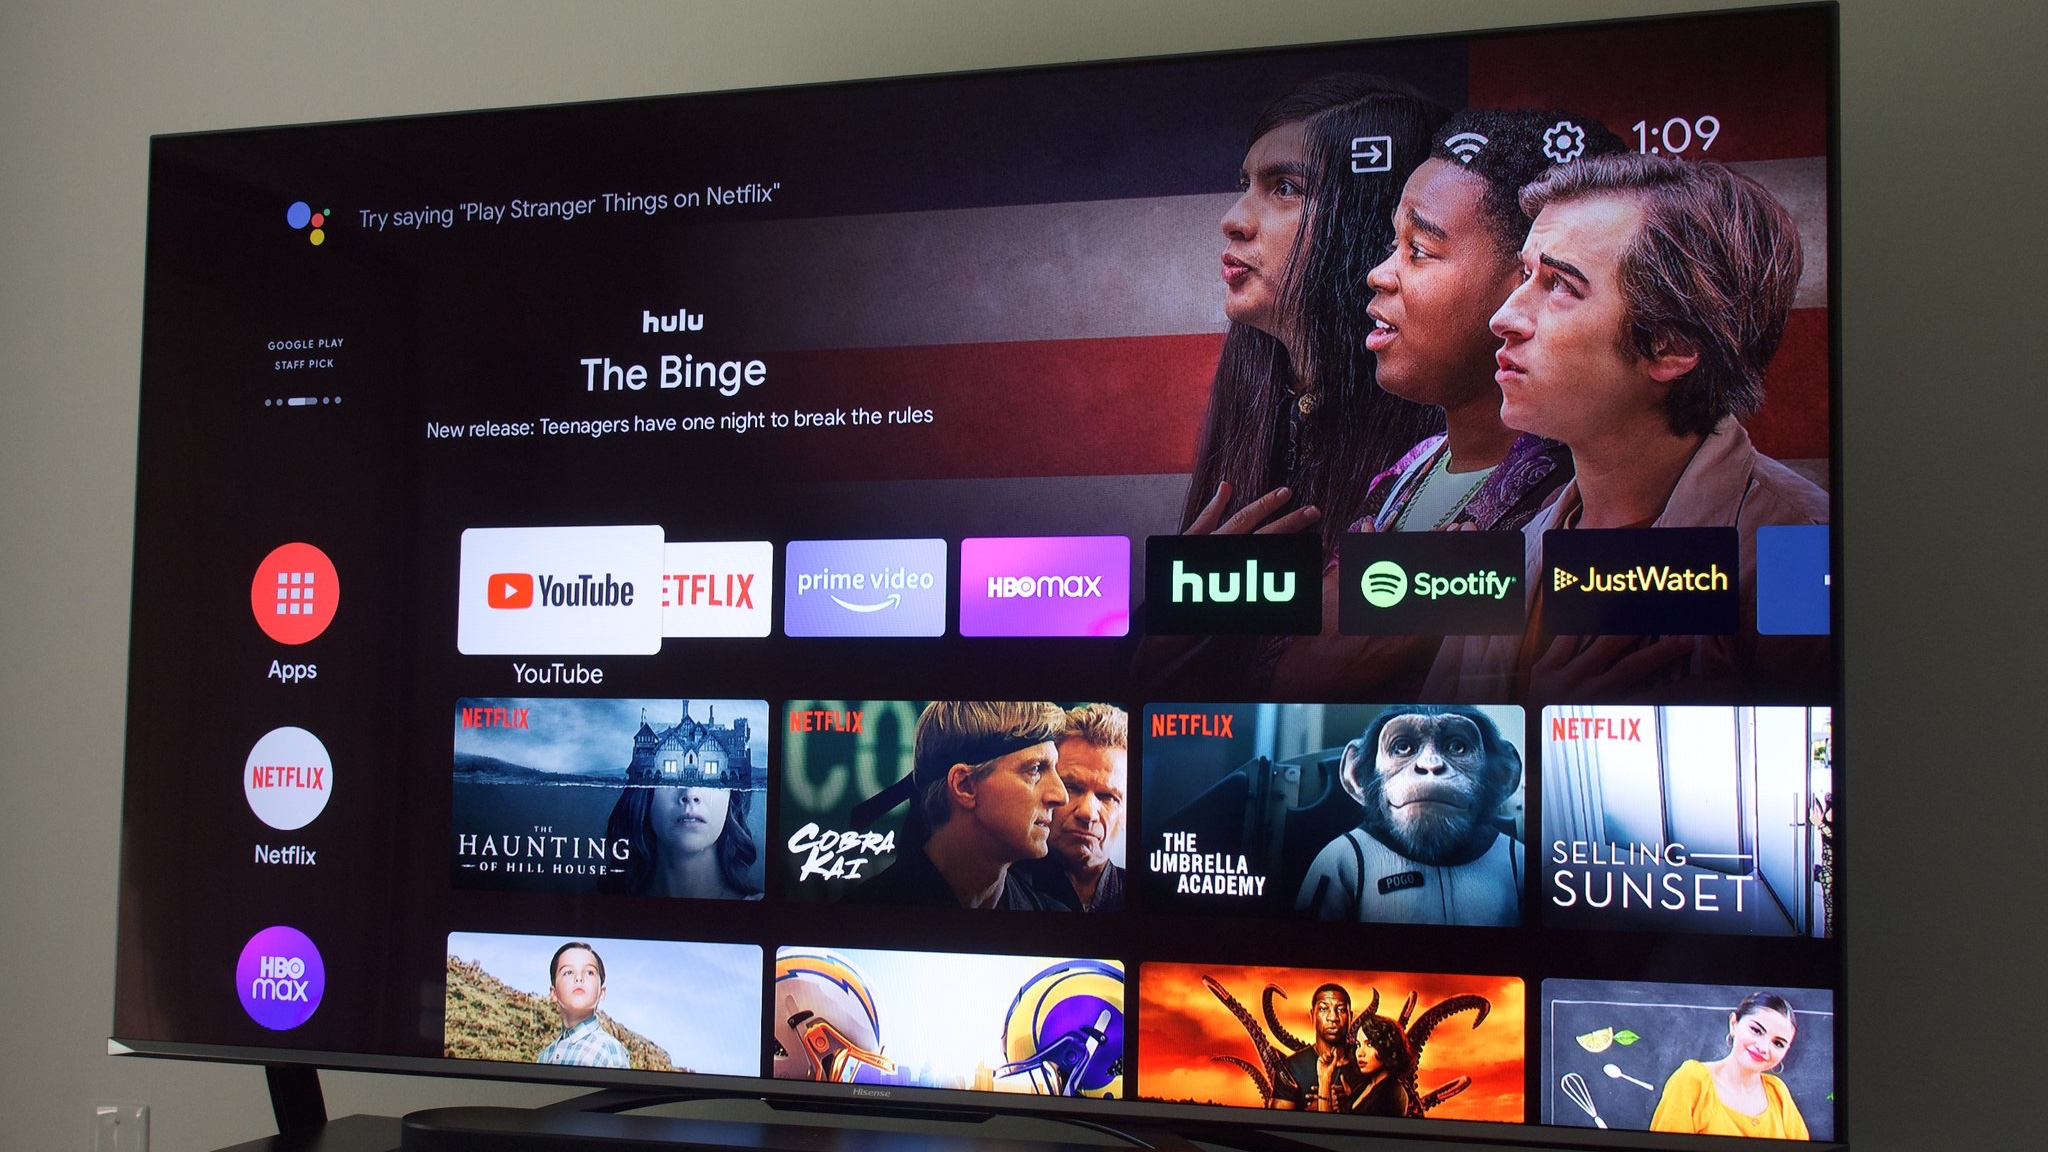 Android TV vs. Roku: Which smart TV platform is right for you